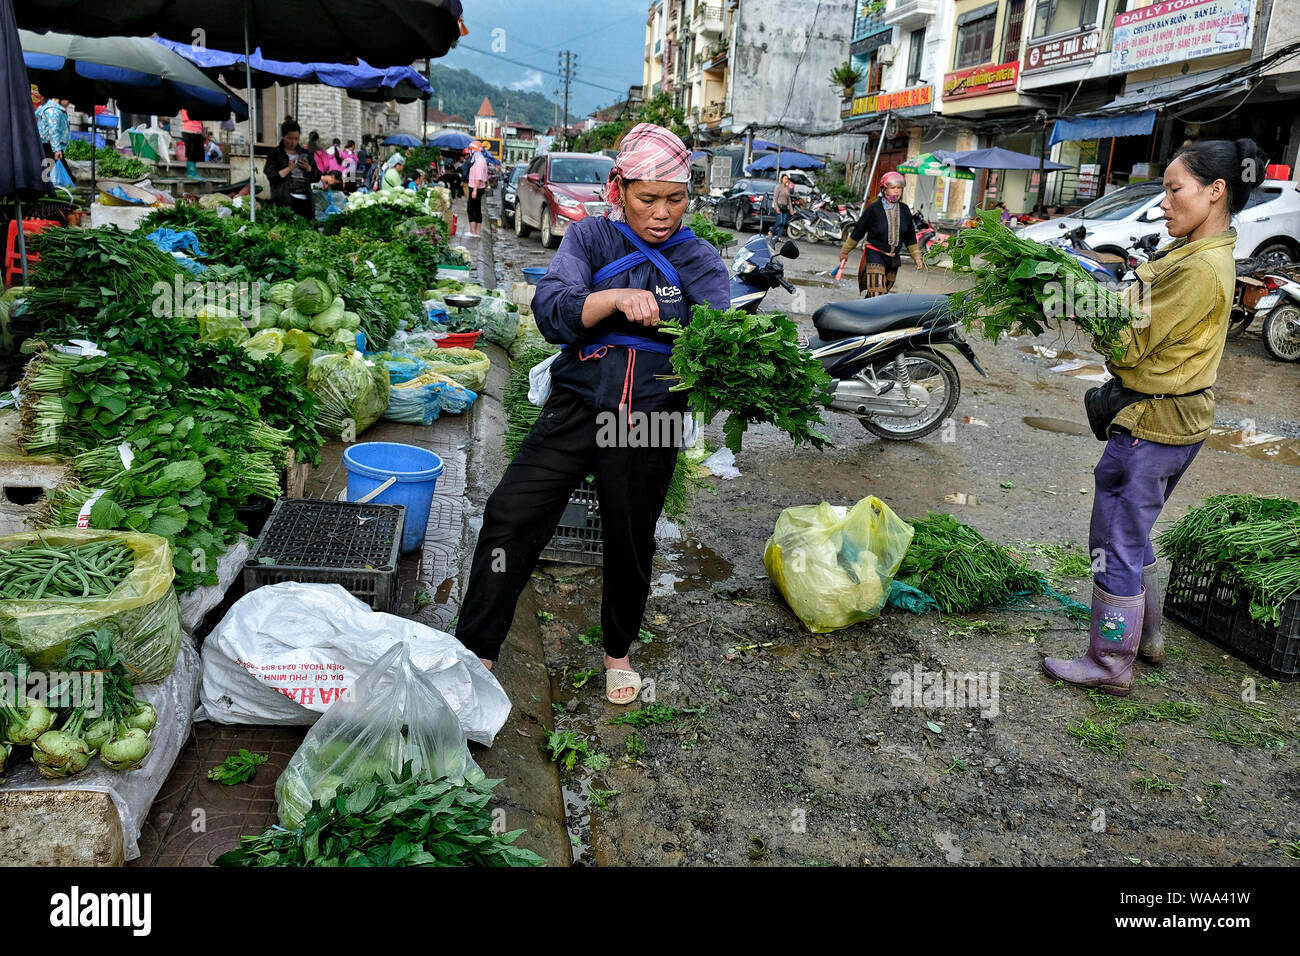 Sa Pa, Vietnam - August 24: Hmong women selling fruits and vegetables at the market on August 24, 2018 in Sa Pa, Vietnam. Stock Photo